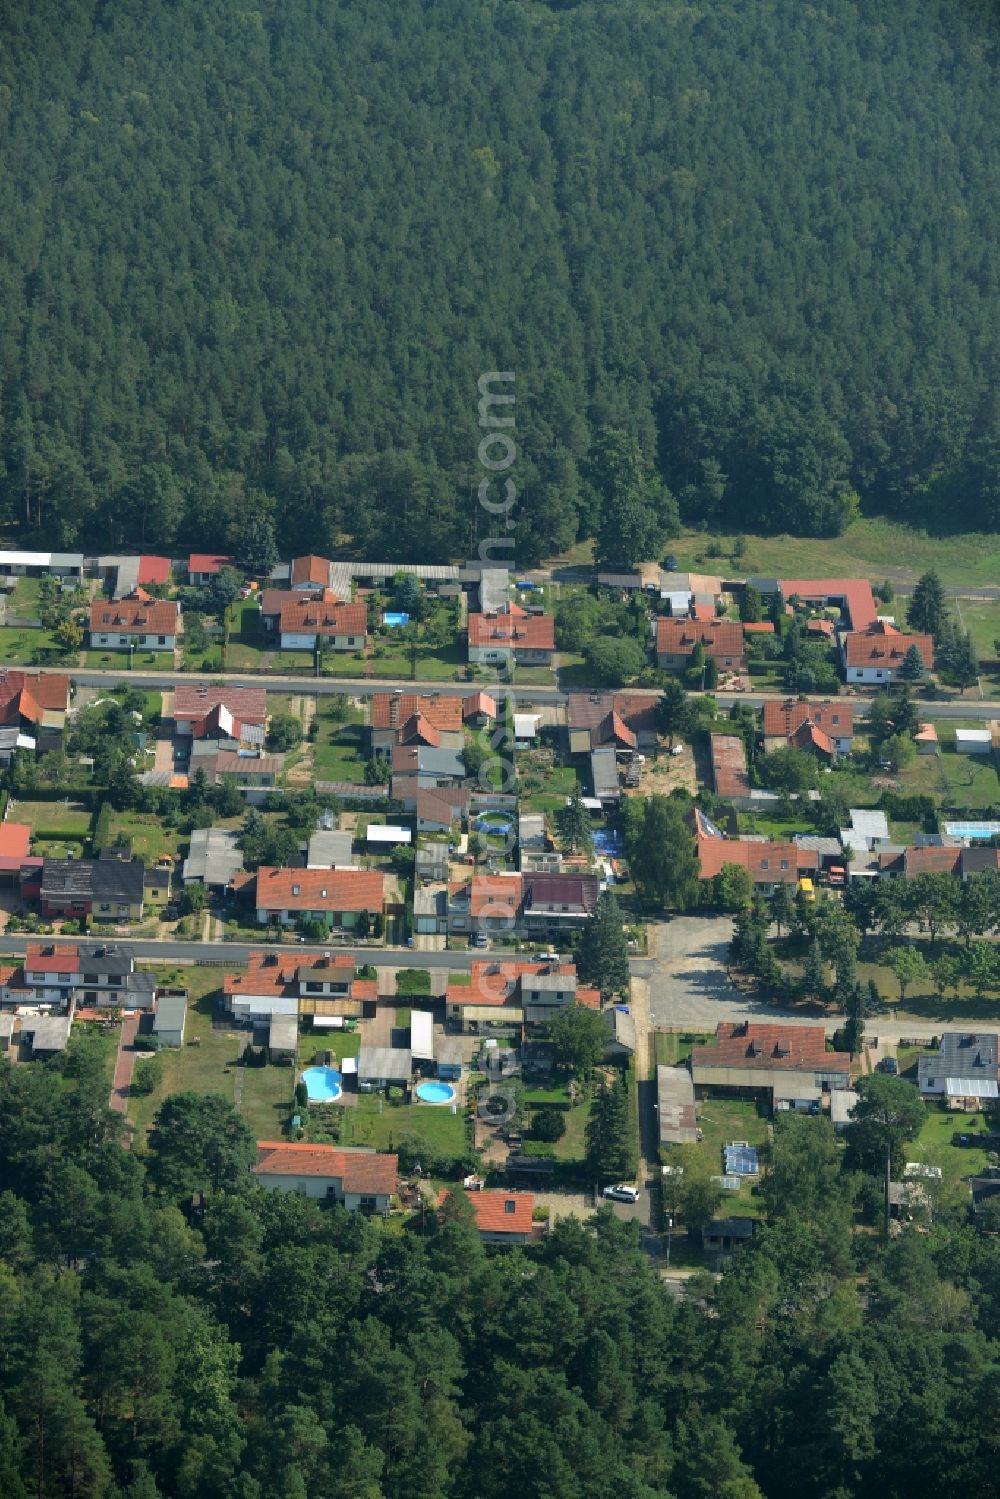 Kummersdorf-Gut from above - Residential area Am Koenigsgraben in a forest in the East of Kummersdorf-Gut in the state of Brandenburg. The residential area with single family and semi-detached houses and gardens is located in a forest along county road L70